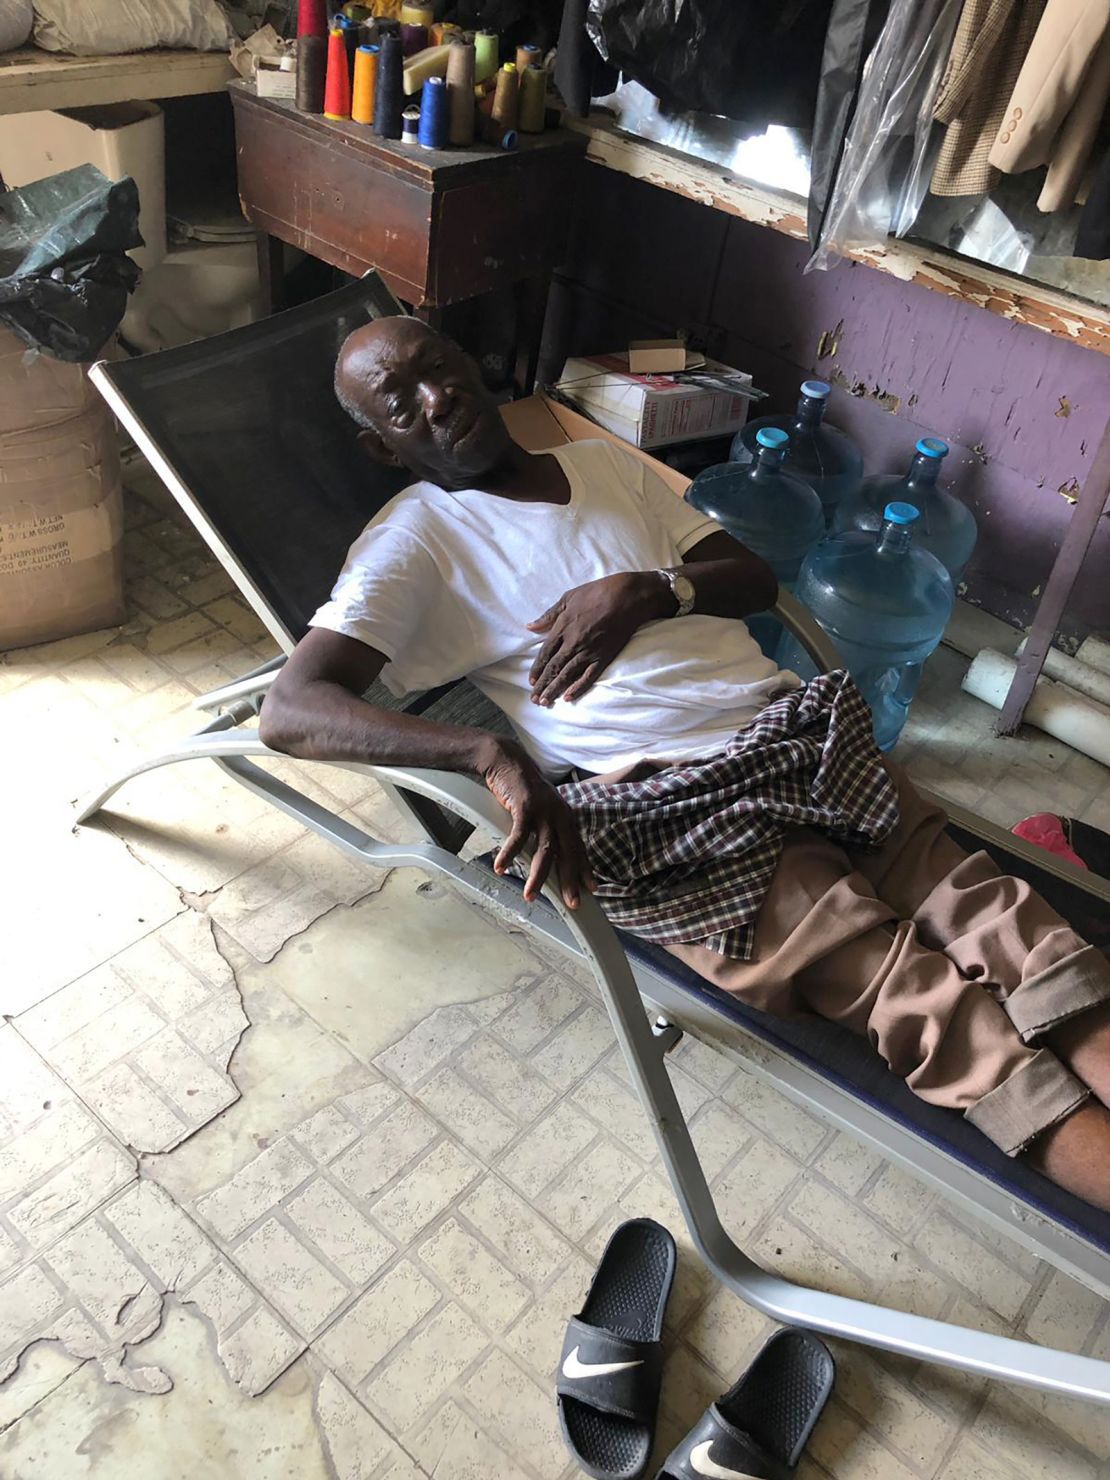 Presendieu Pierre Mervil, 81, survived the hurricane but suffers from body pains.